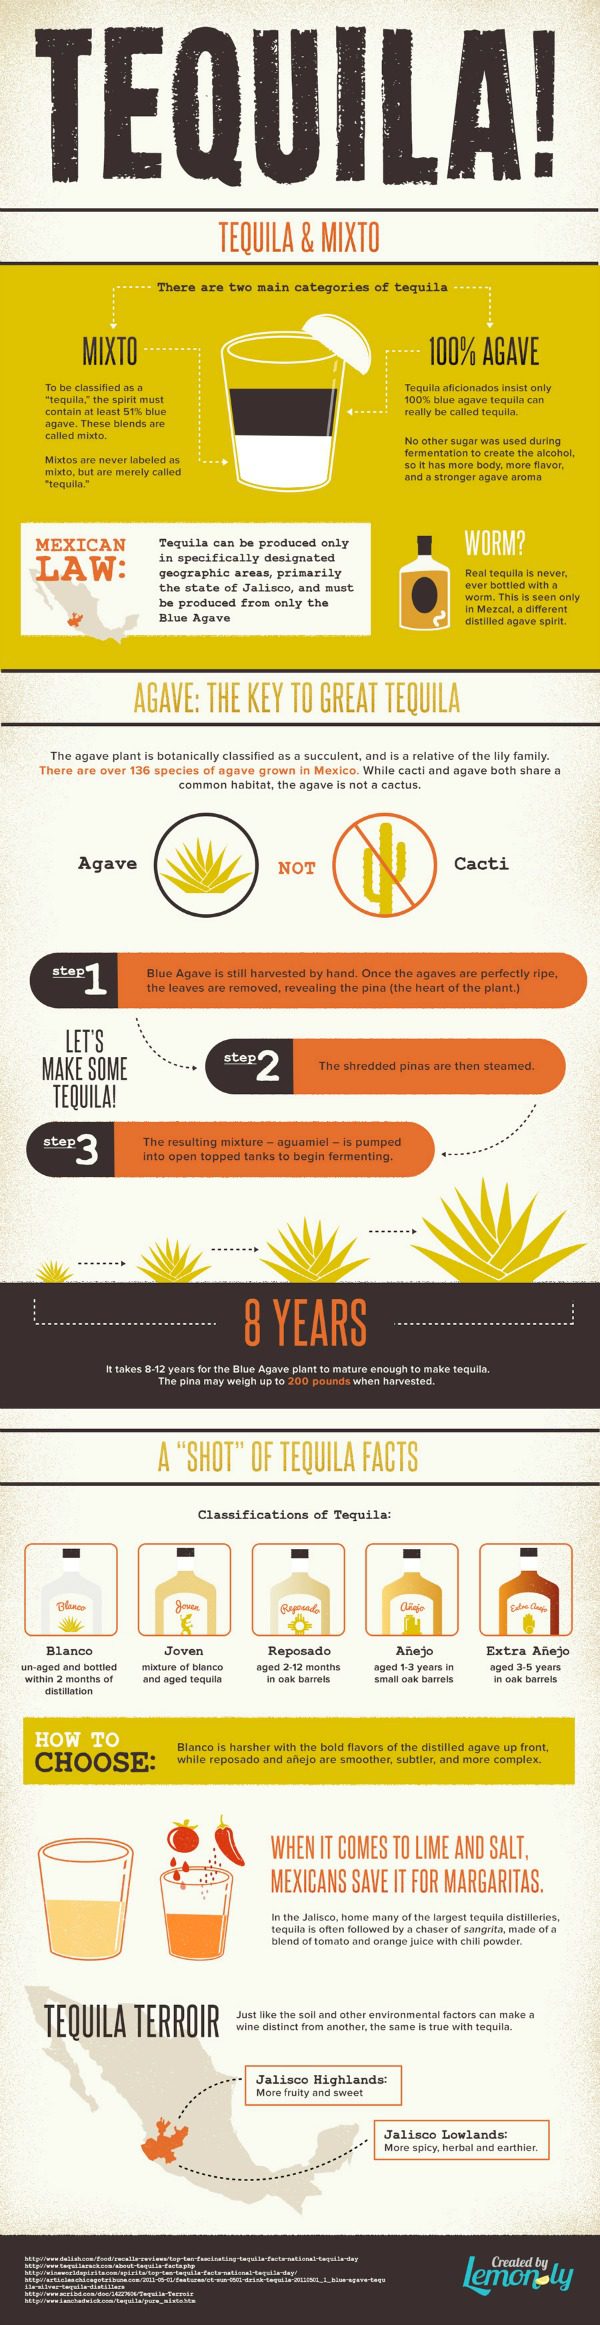 Tequila Facts and Statistics